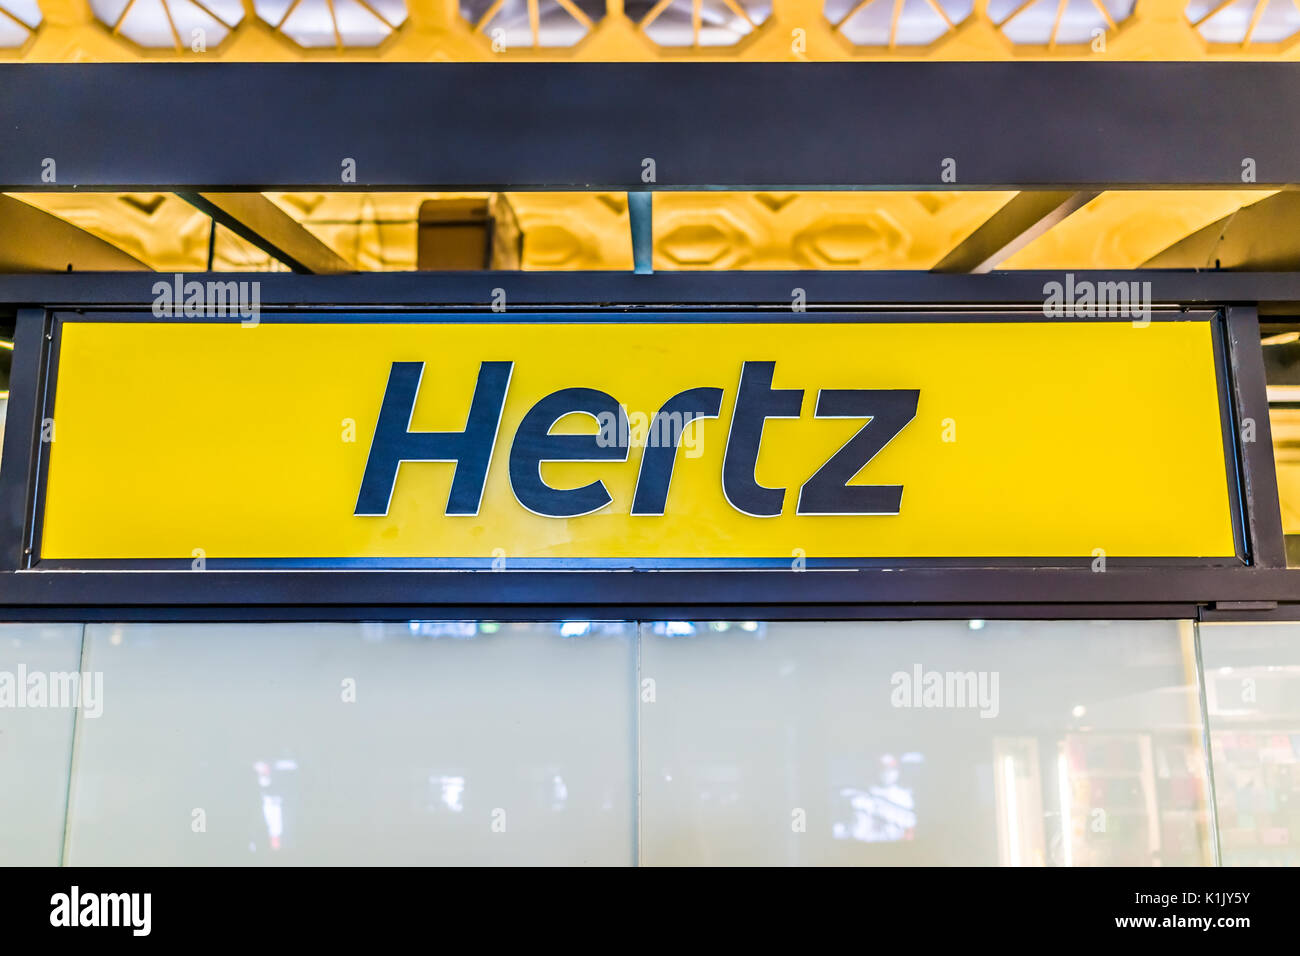 Washington DC, USA - July 1, 2017: Inside Union Station in capital city with car rental sign for Hertz Stock Photo